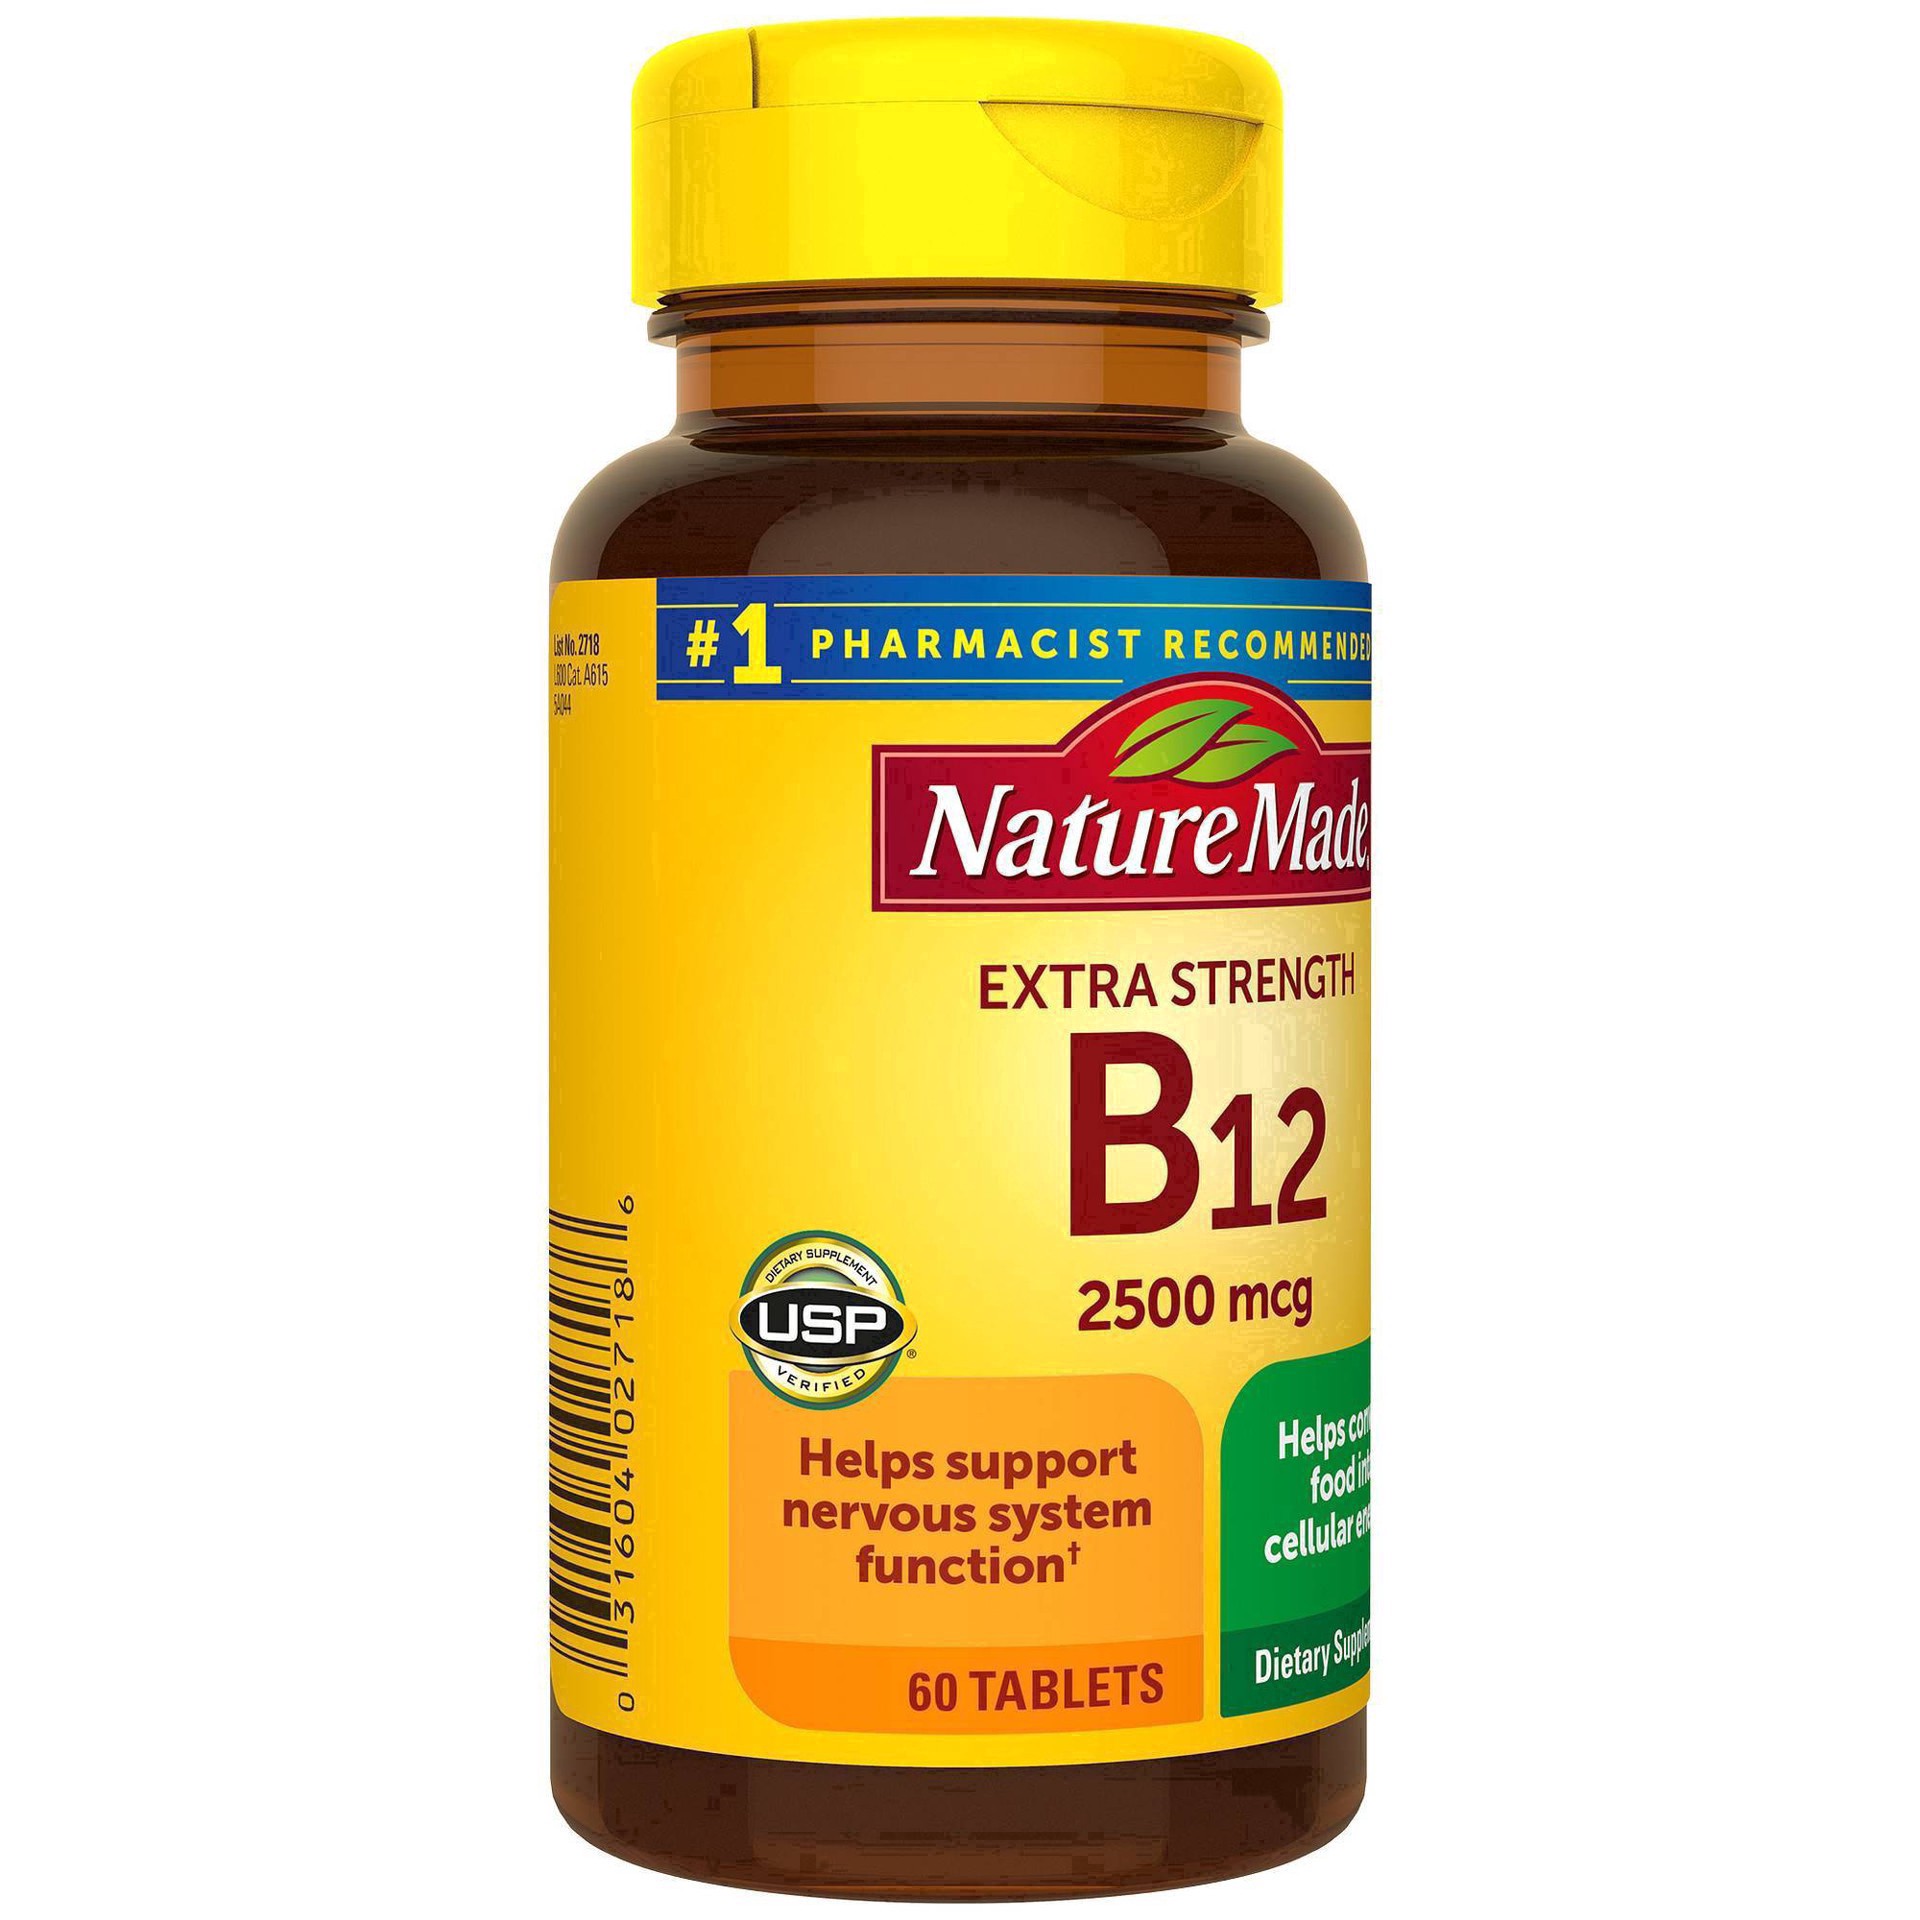 slide 55 of 60, Nature Made Extra Strength Vitamin B12 2500 mcg Tablets for Energy Metabolism Support - 60ct, 60 ct